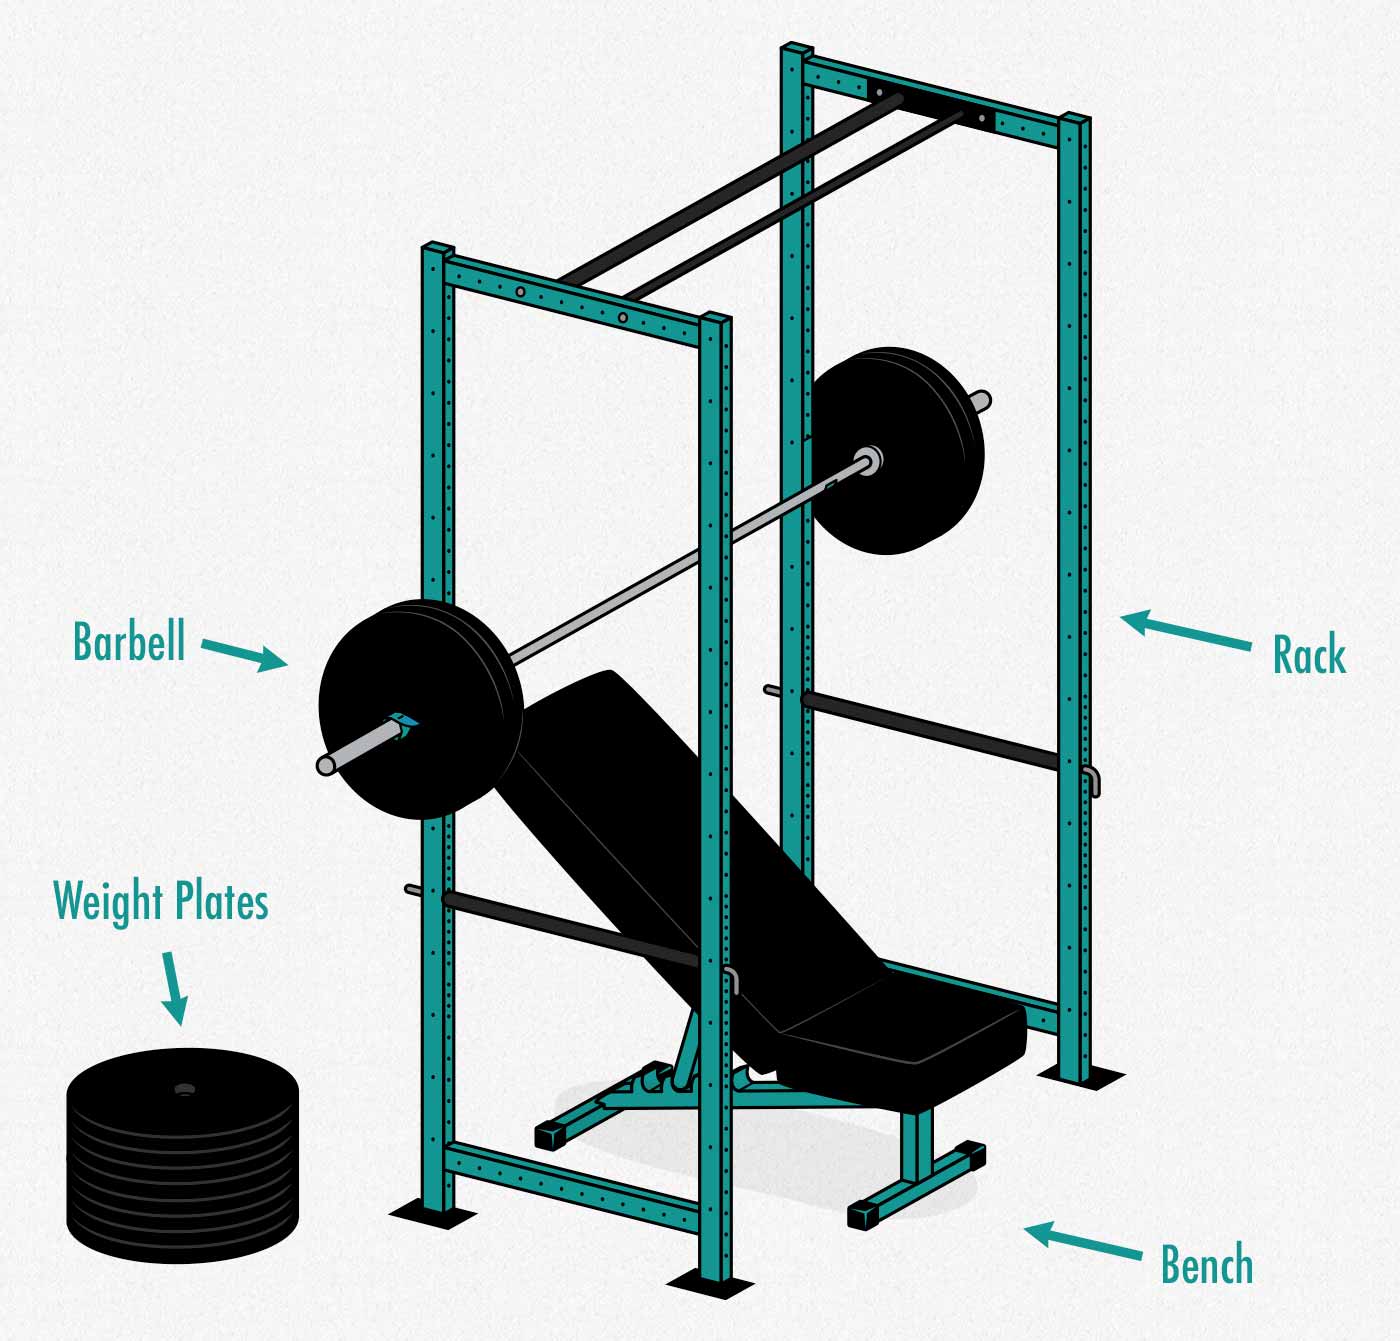 Diagram showing how to build a barbell home gym for building muscle for women.